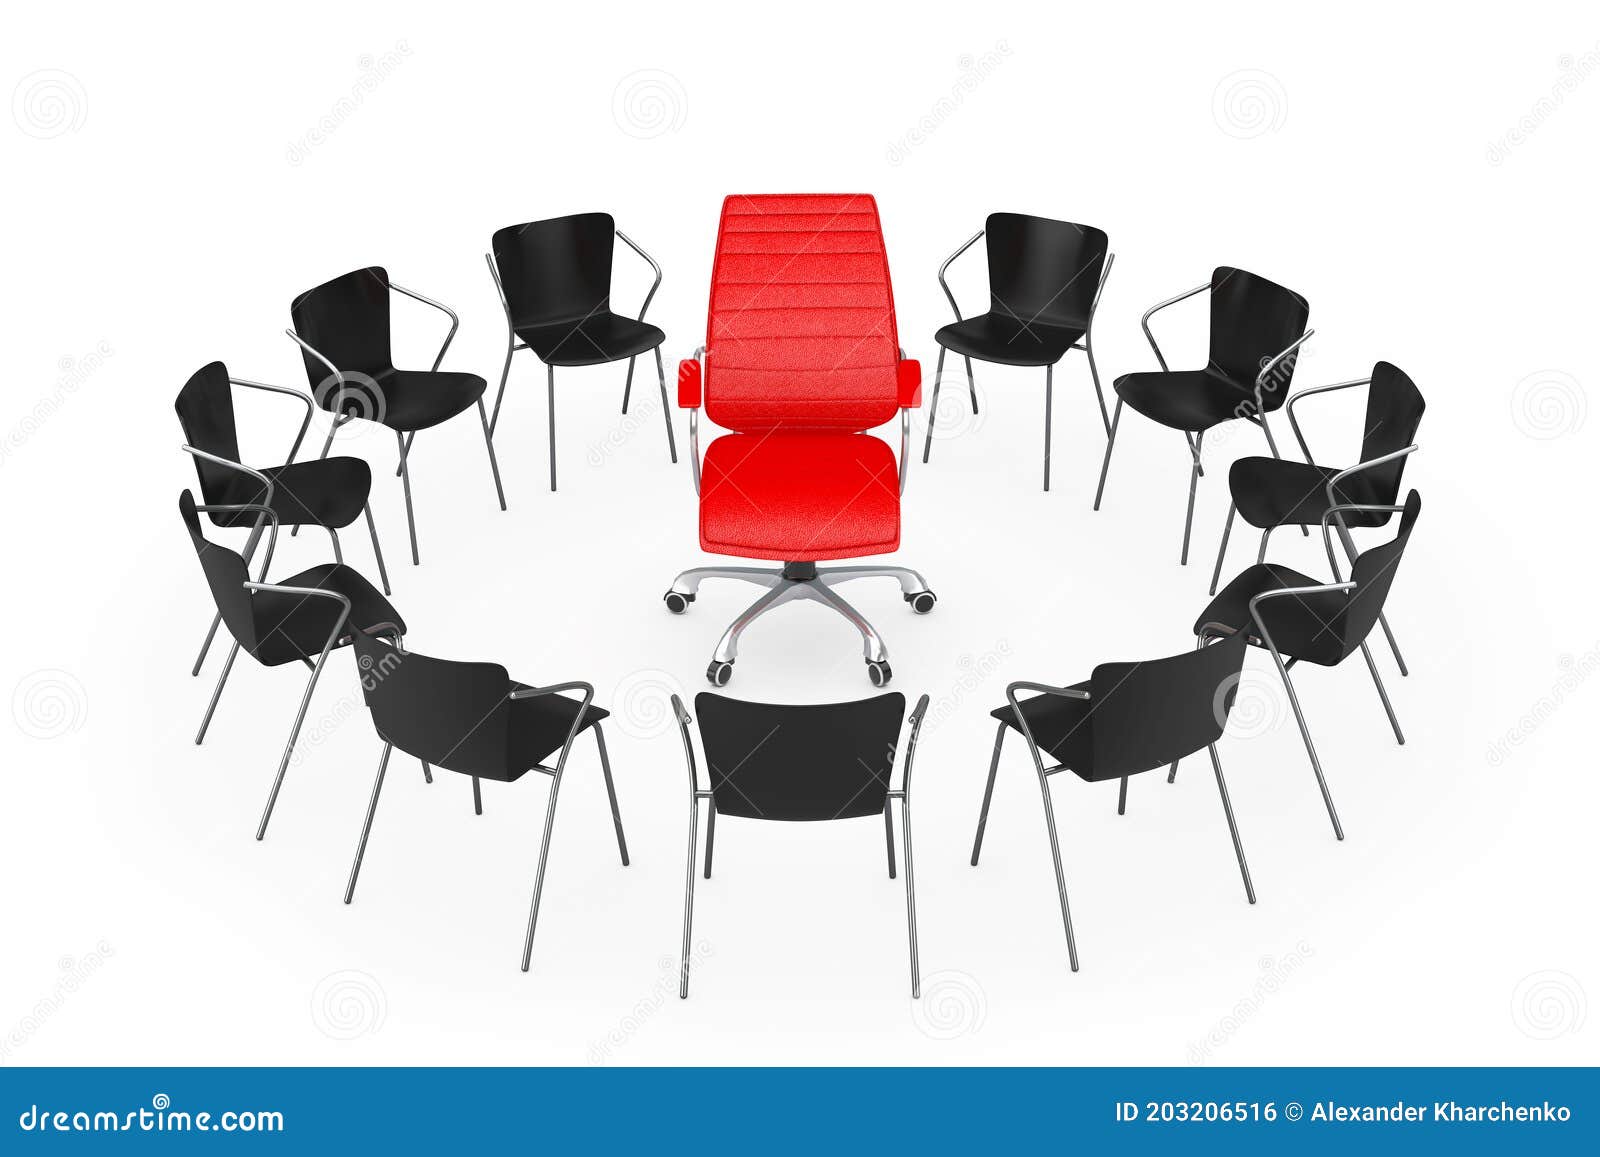 Red Leader Chair With Large Group Of Black Chairs Stock Photo ...